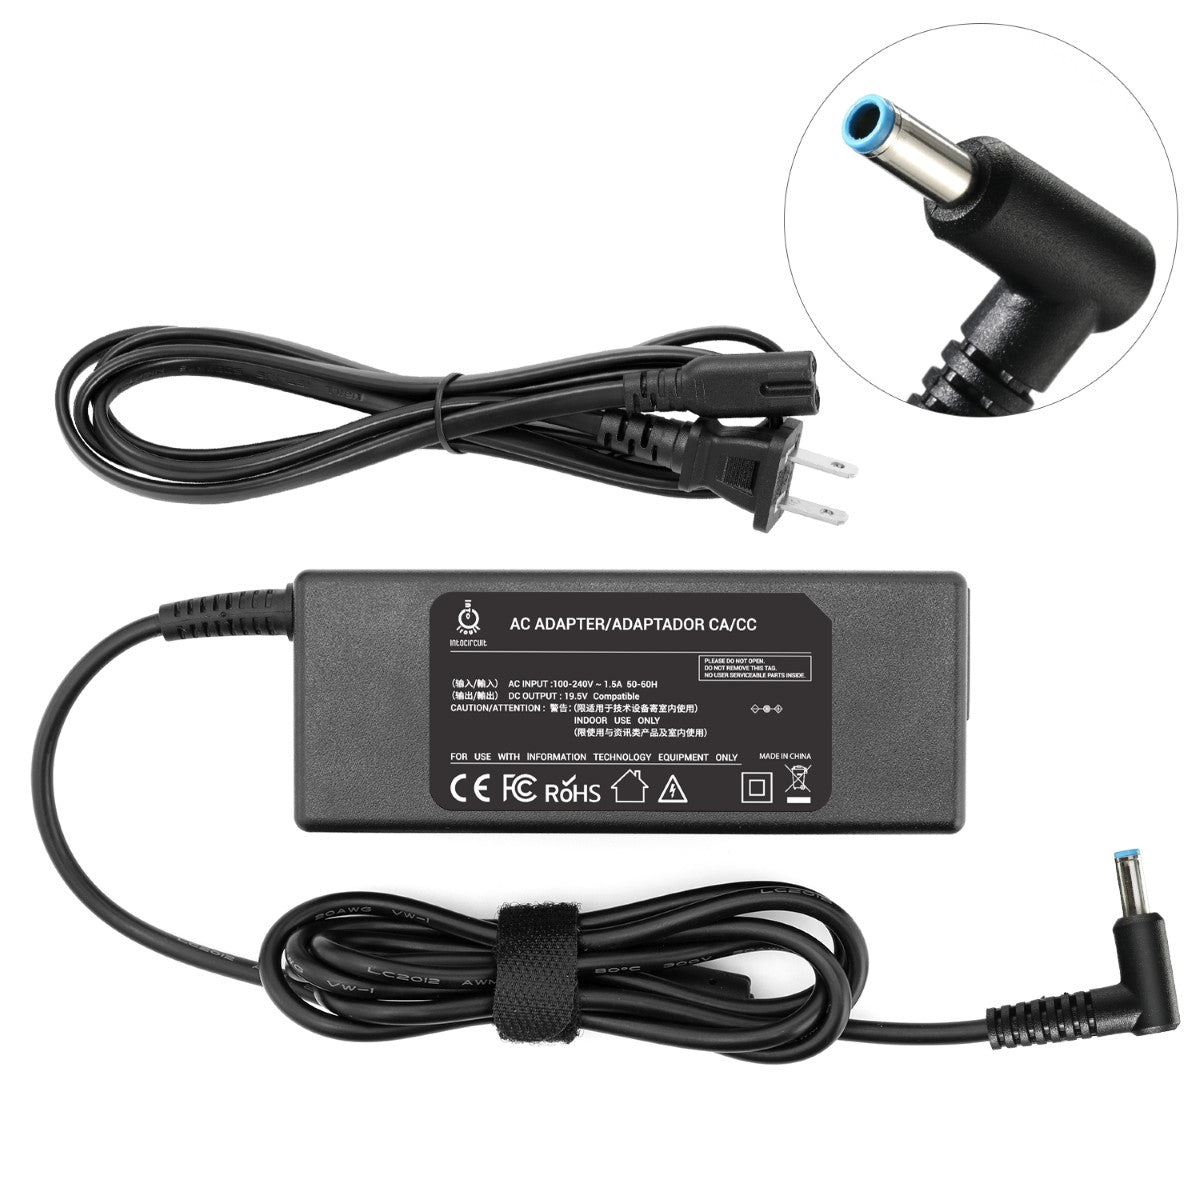 Charger for HP 15-bw035nr Laptop